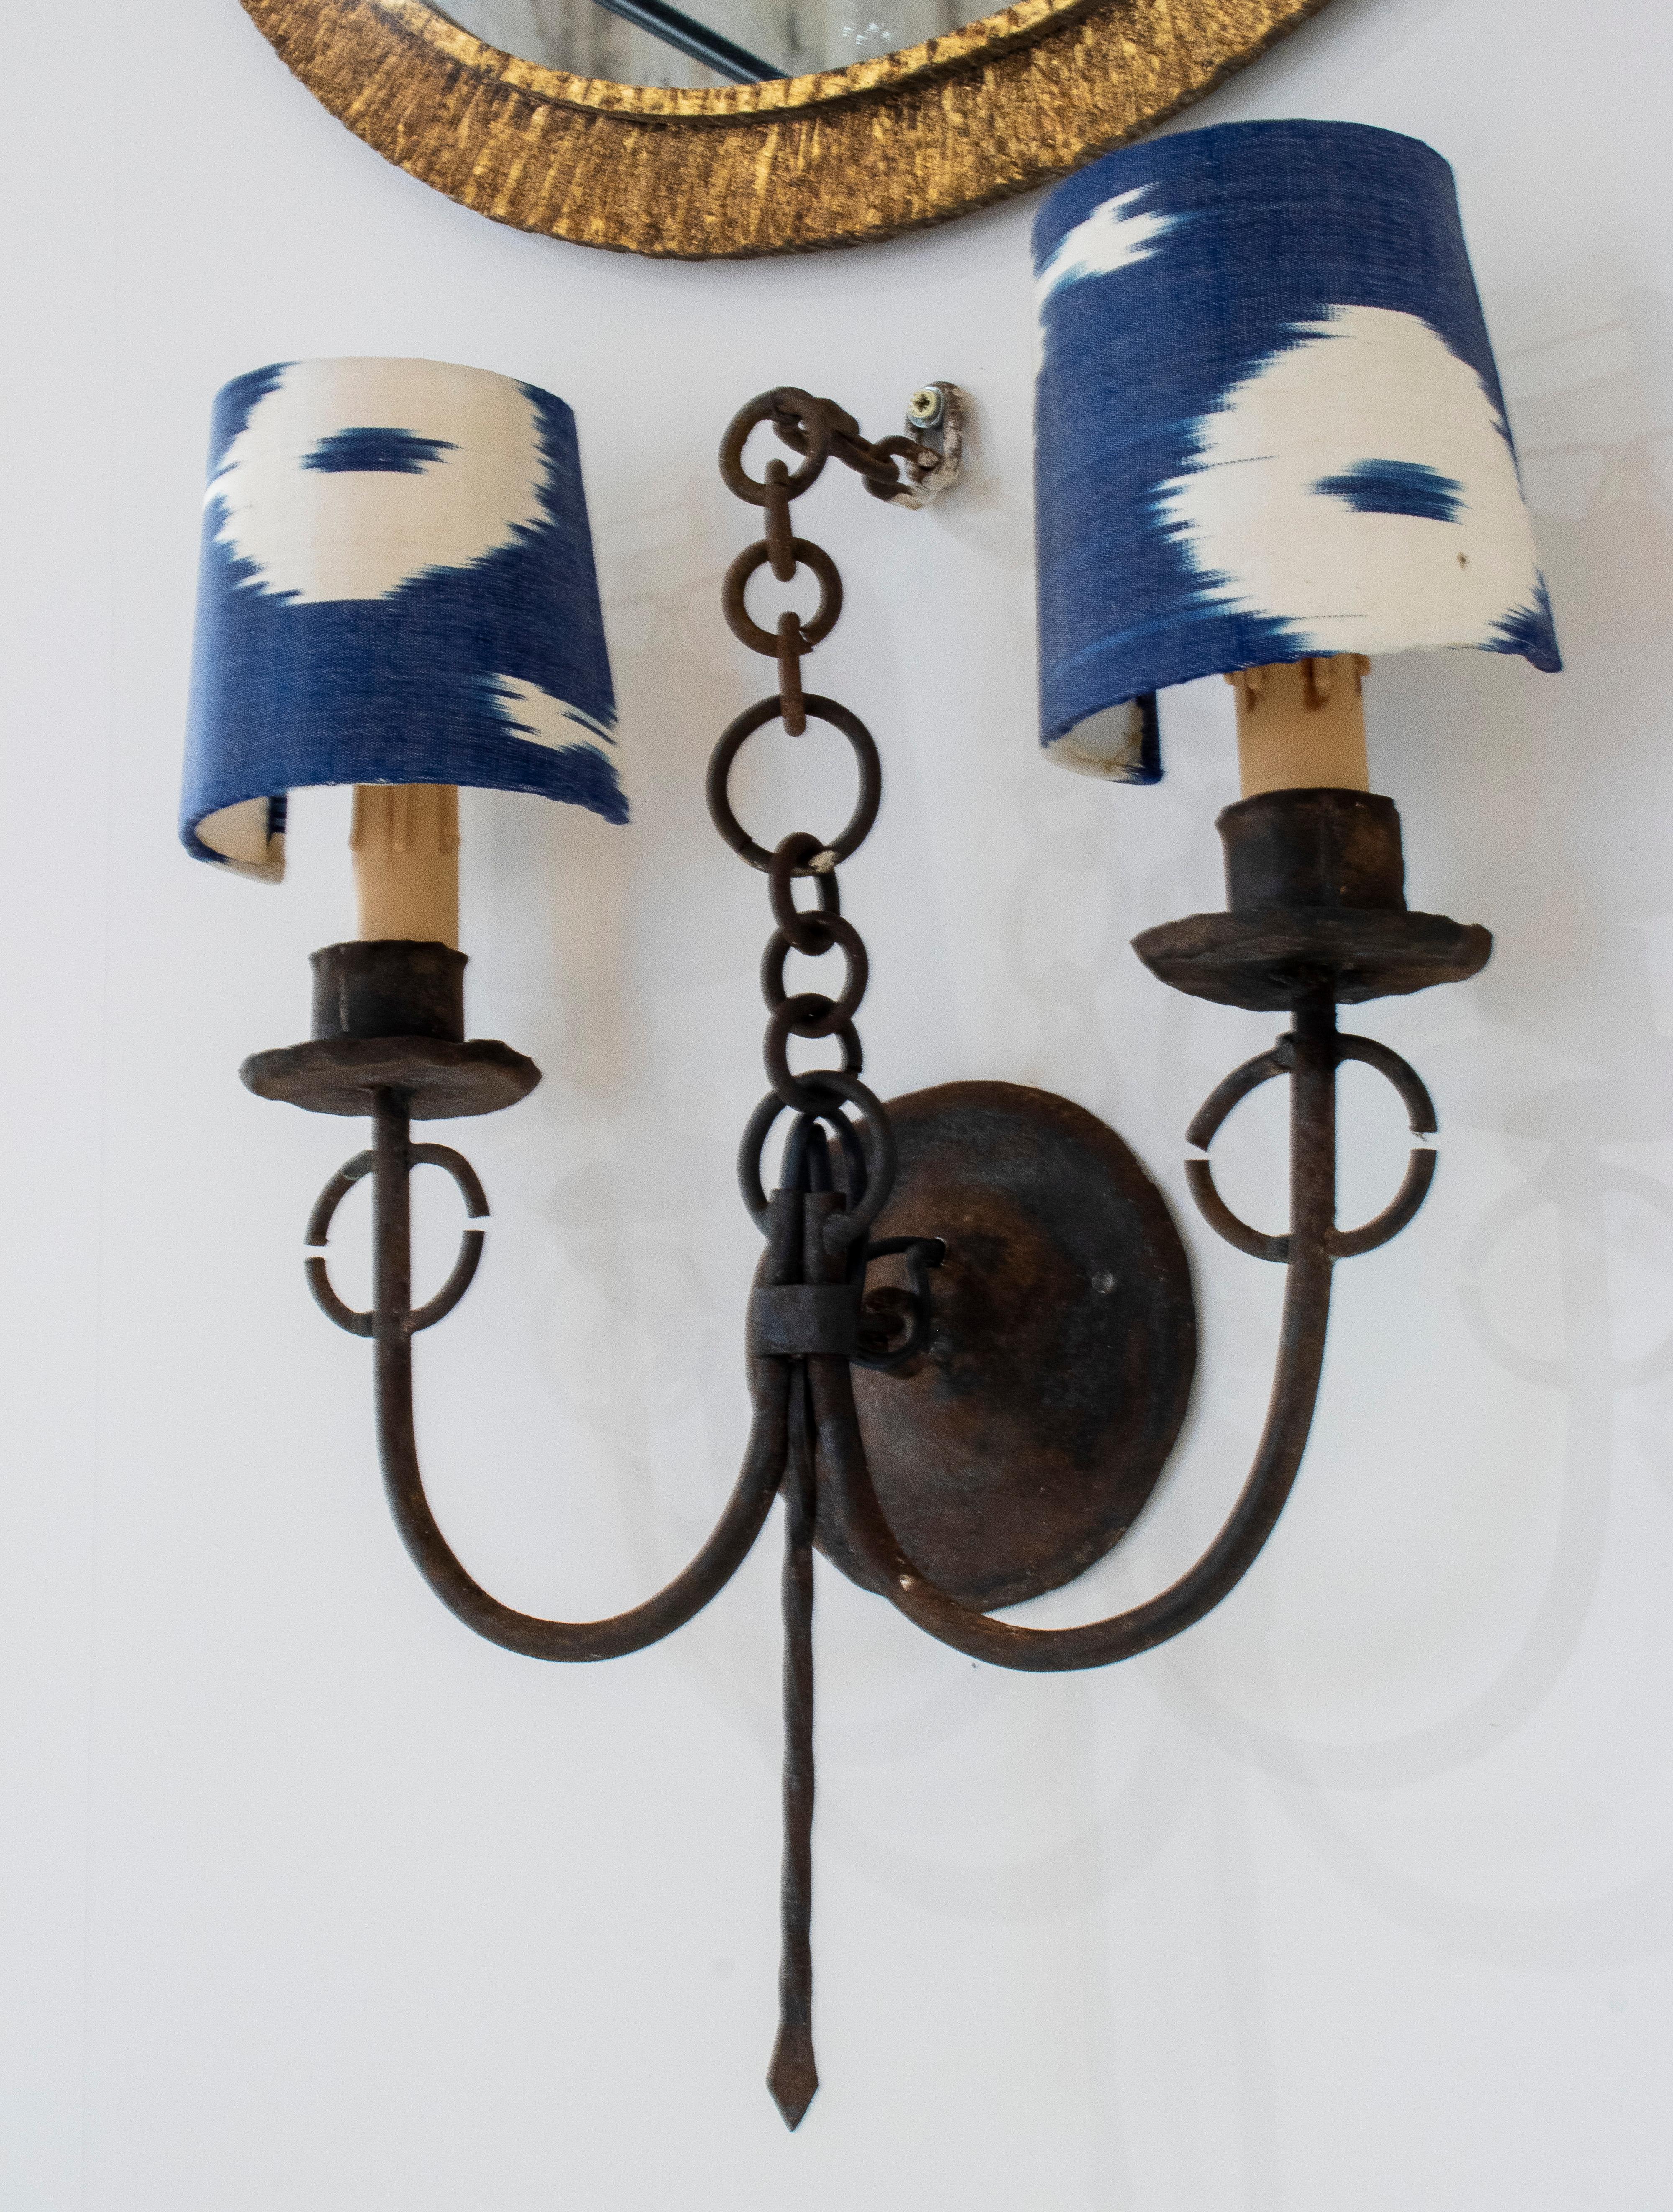 European Pair of 1950s Spanish 2-Arm Iron Sconce Wall Lamps w/ Upholstered Lampshades